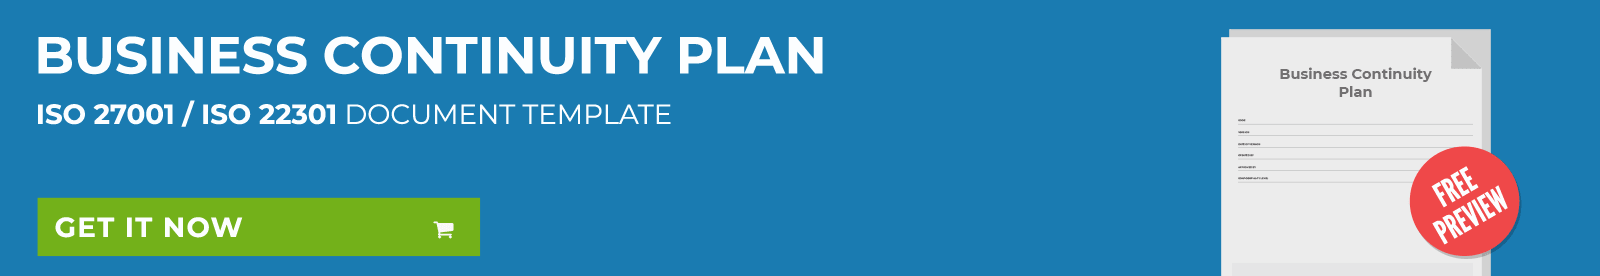 Business Continuity Plan Sample Free